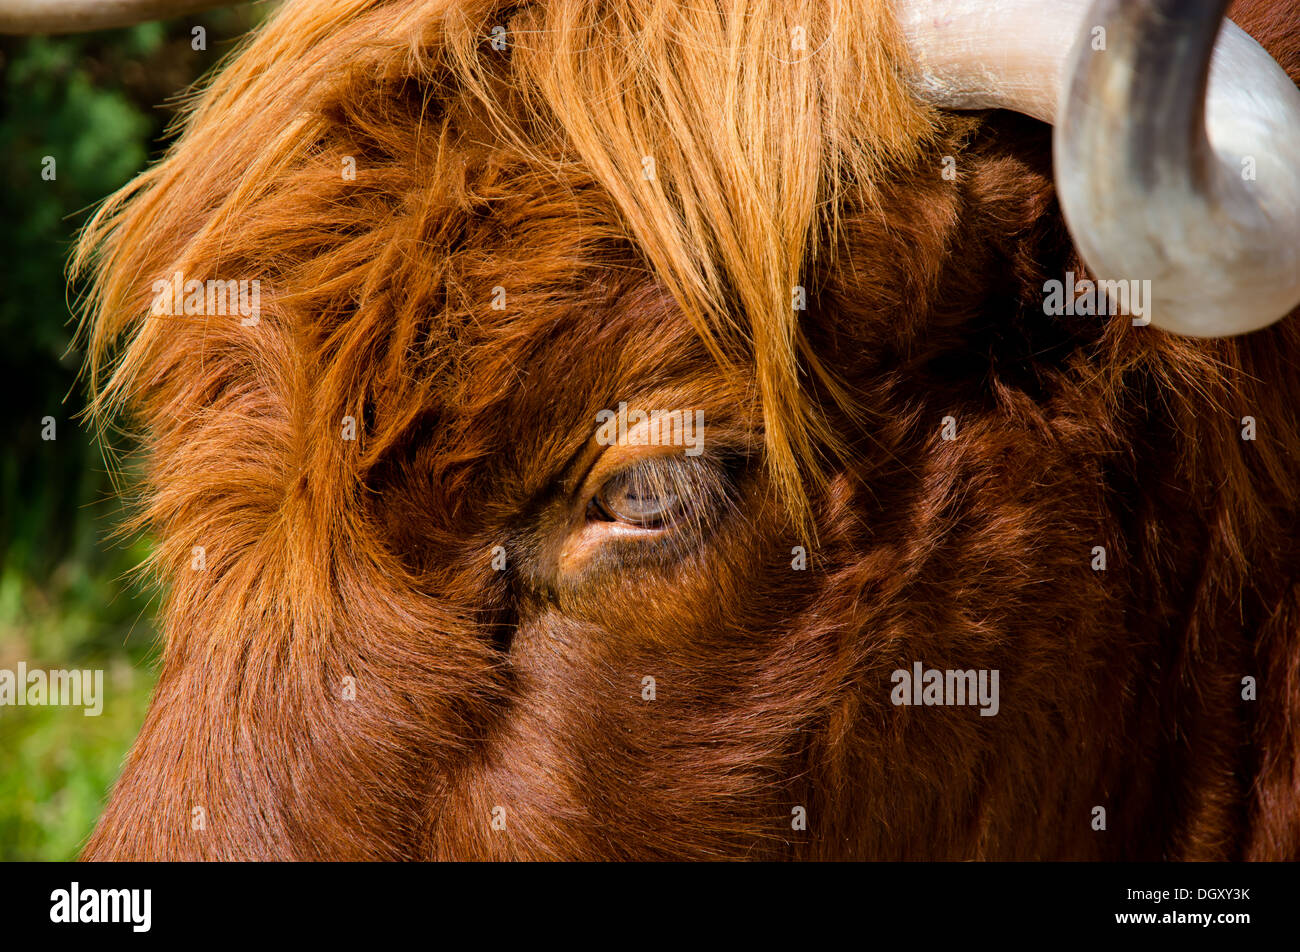 Portrait Of The Furry Head Of A Highland Cattle In Scotland Stock Photo